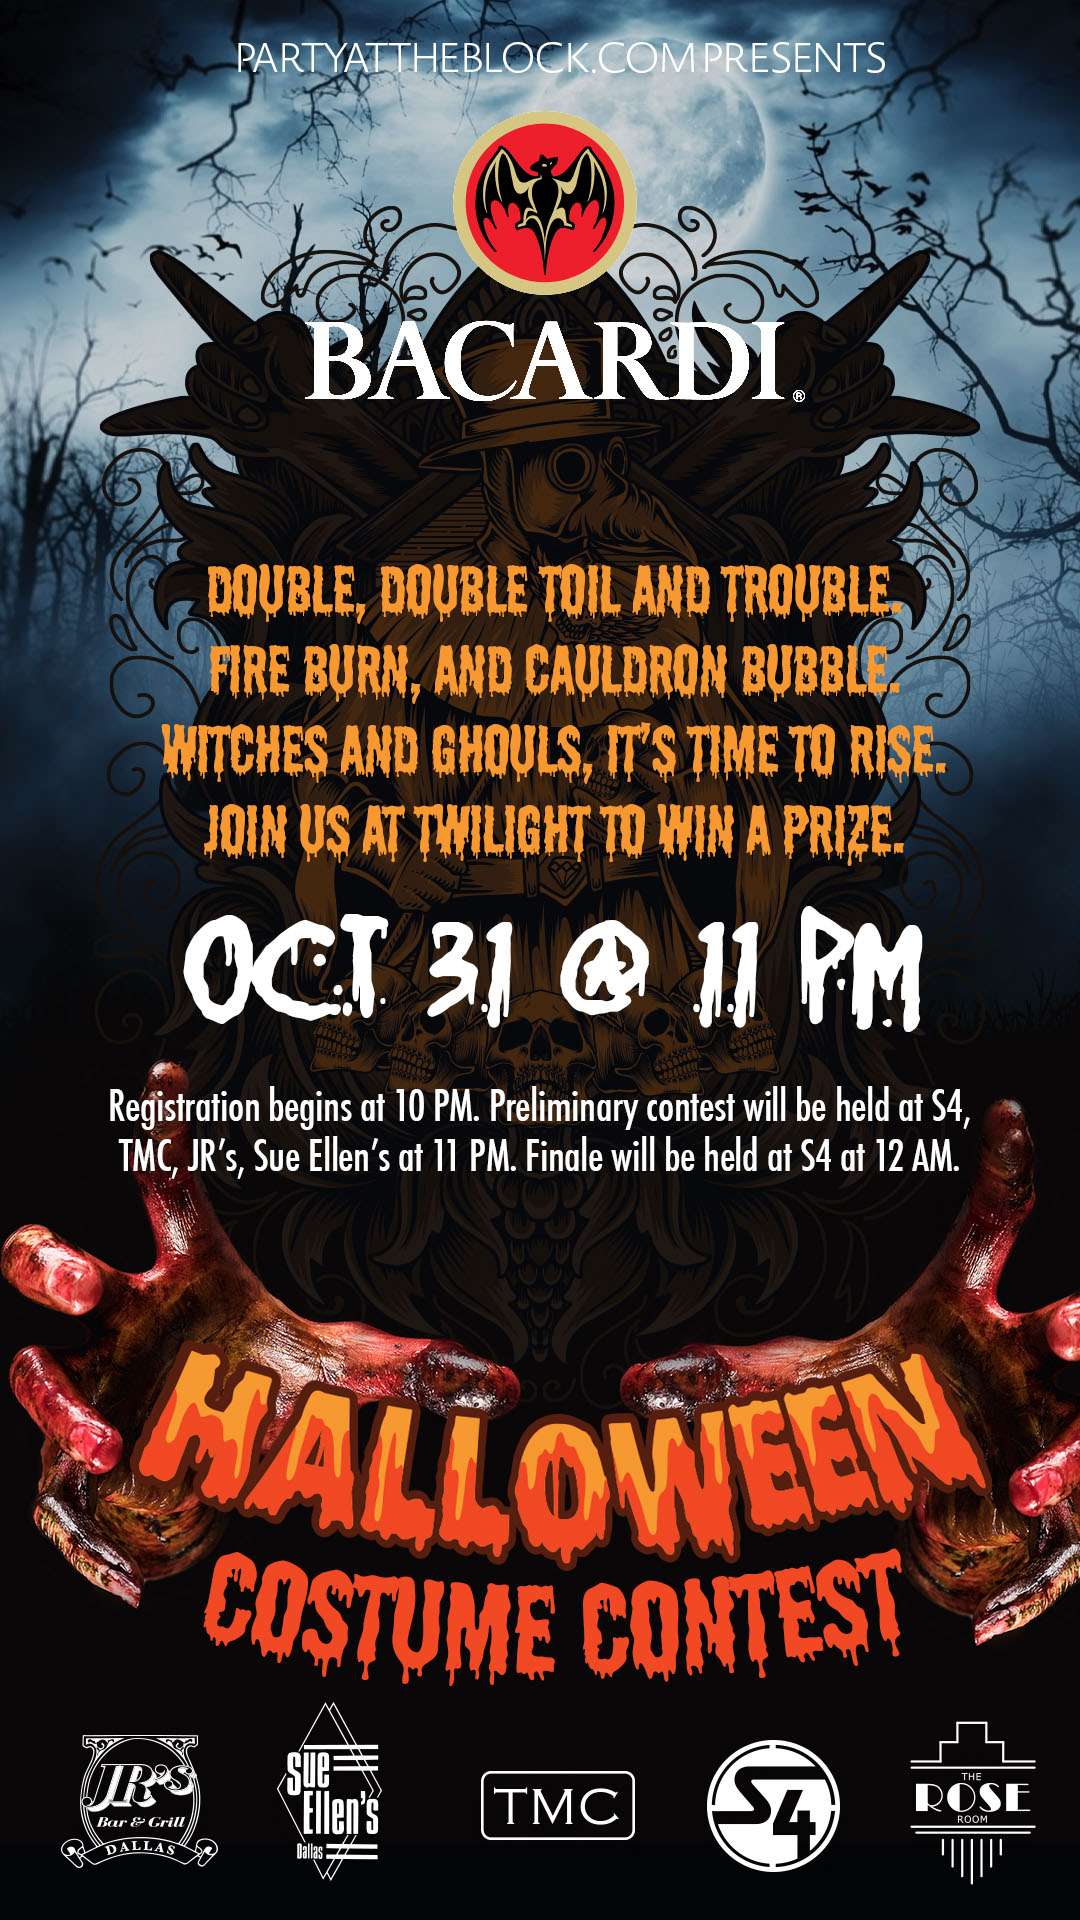 Halloween Costume Contest Party at the Block LGBTQ+ Nightlife